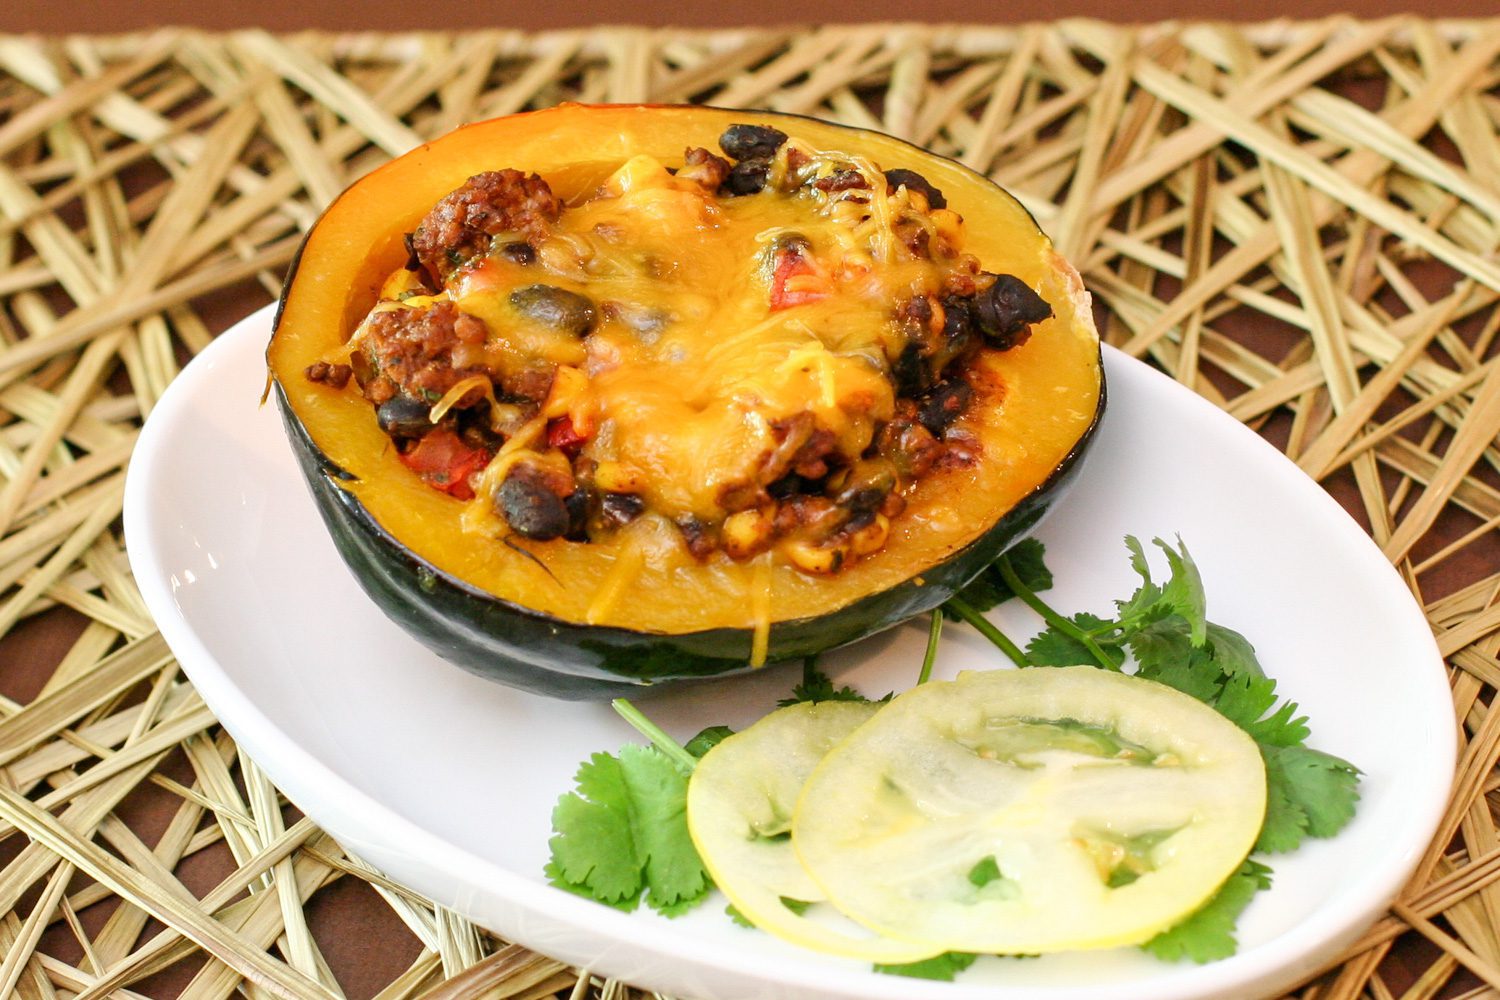 tex mex stuffed acorn squash with ground beef and black beans on a plate